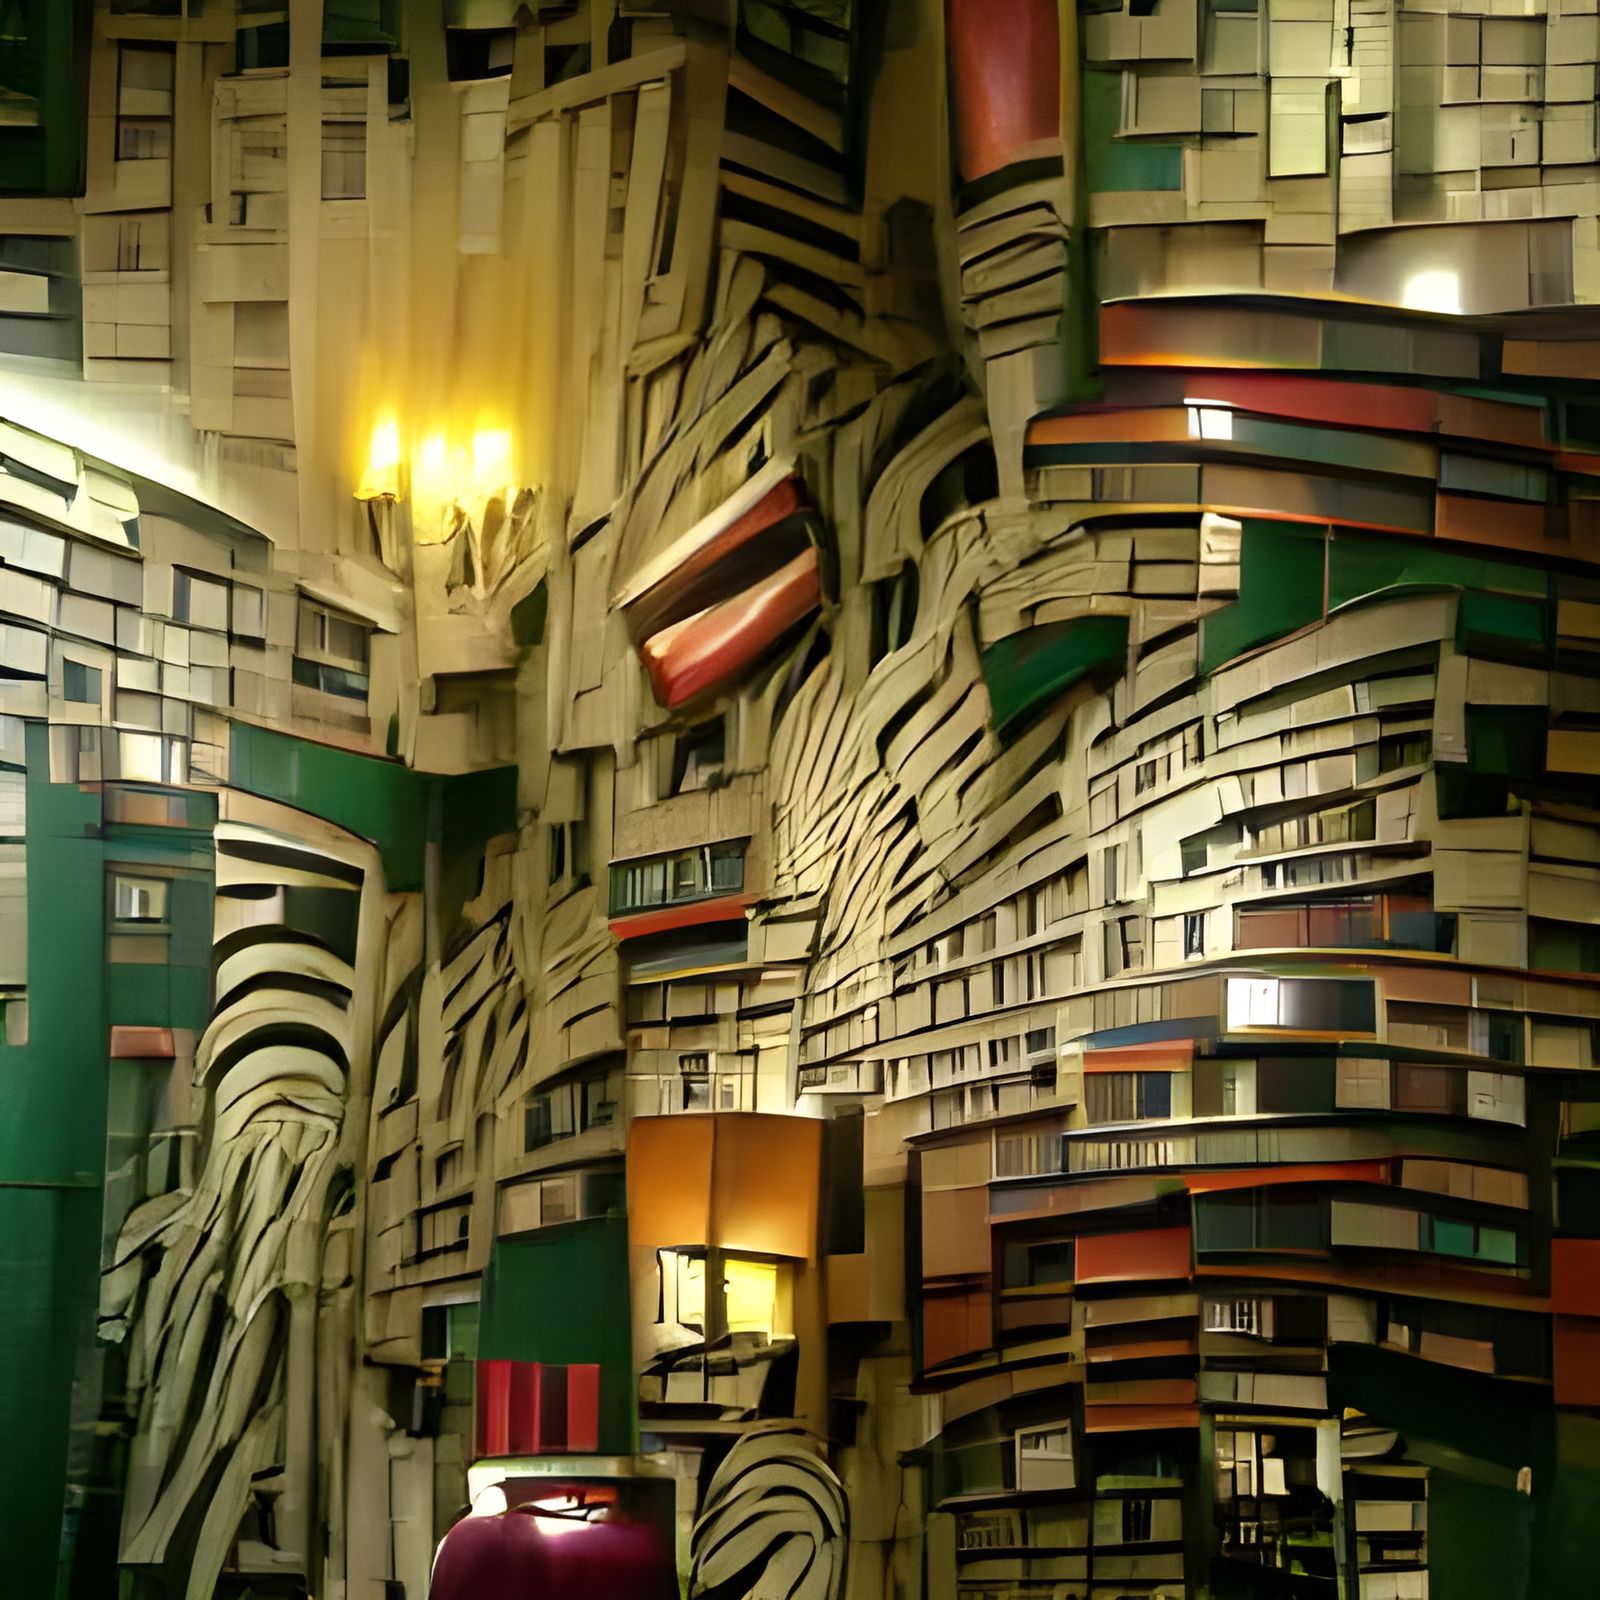 Walls made of books. 